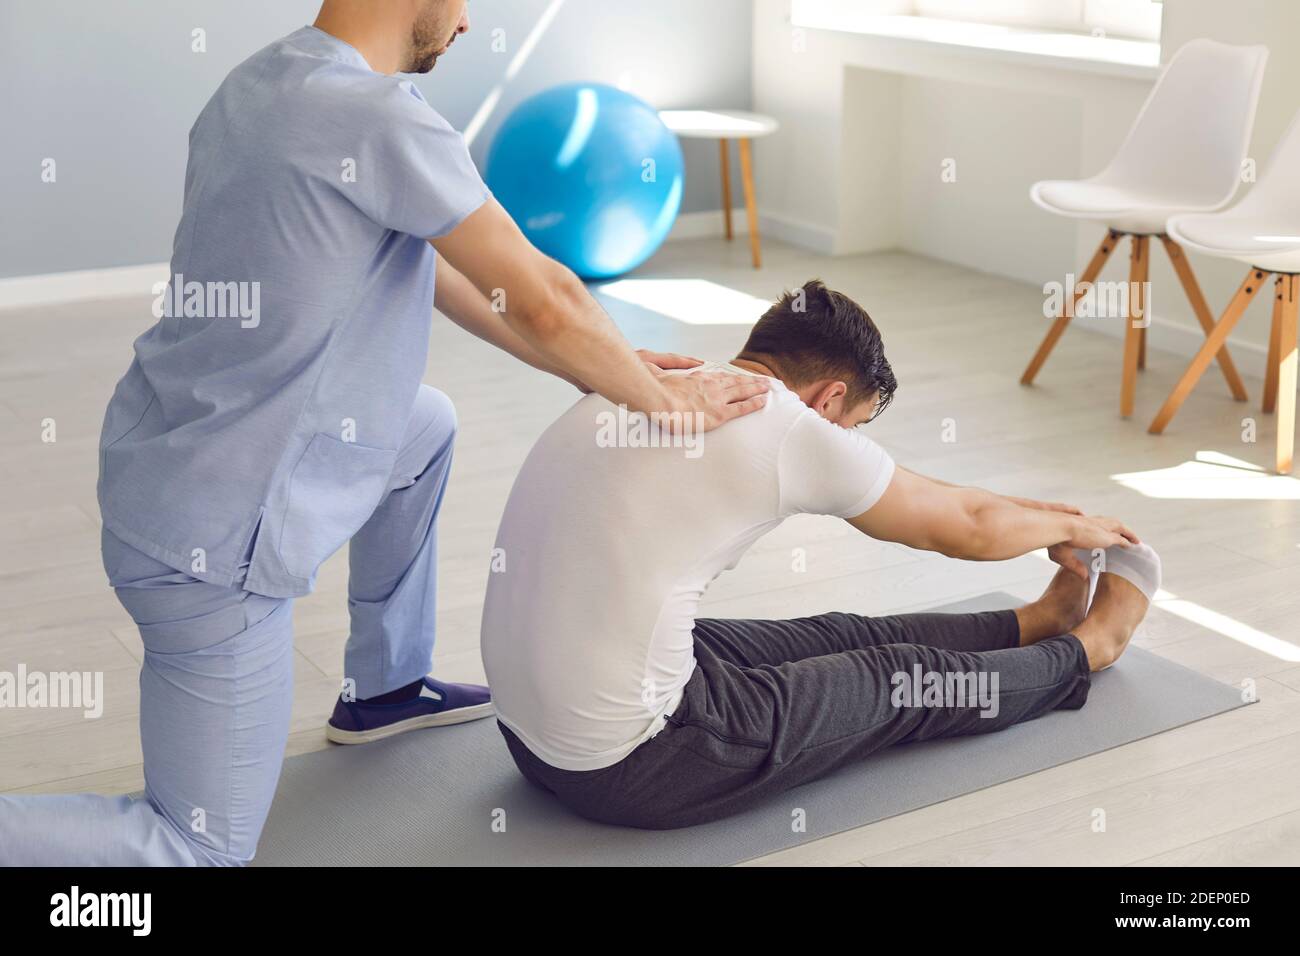 Side view doctor helps the patient to do stretching exercises and yoga after the injury. Stock Photo